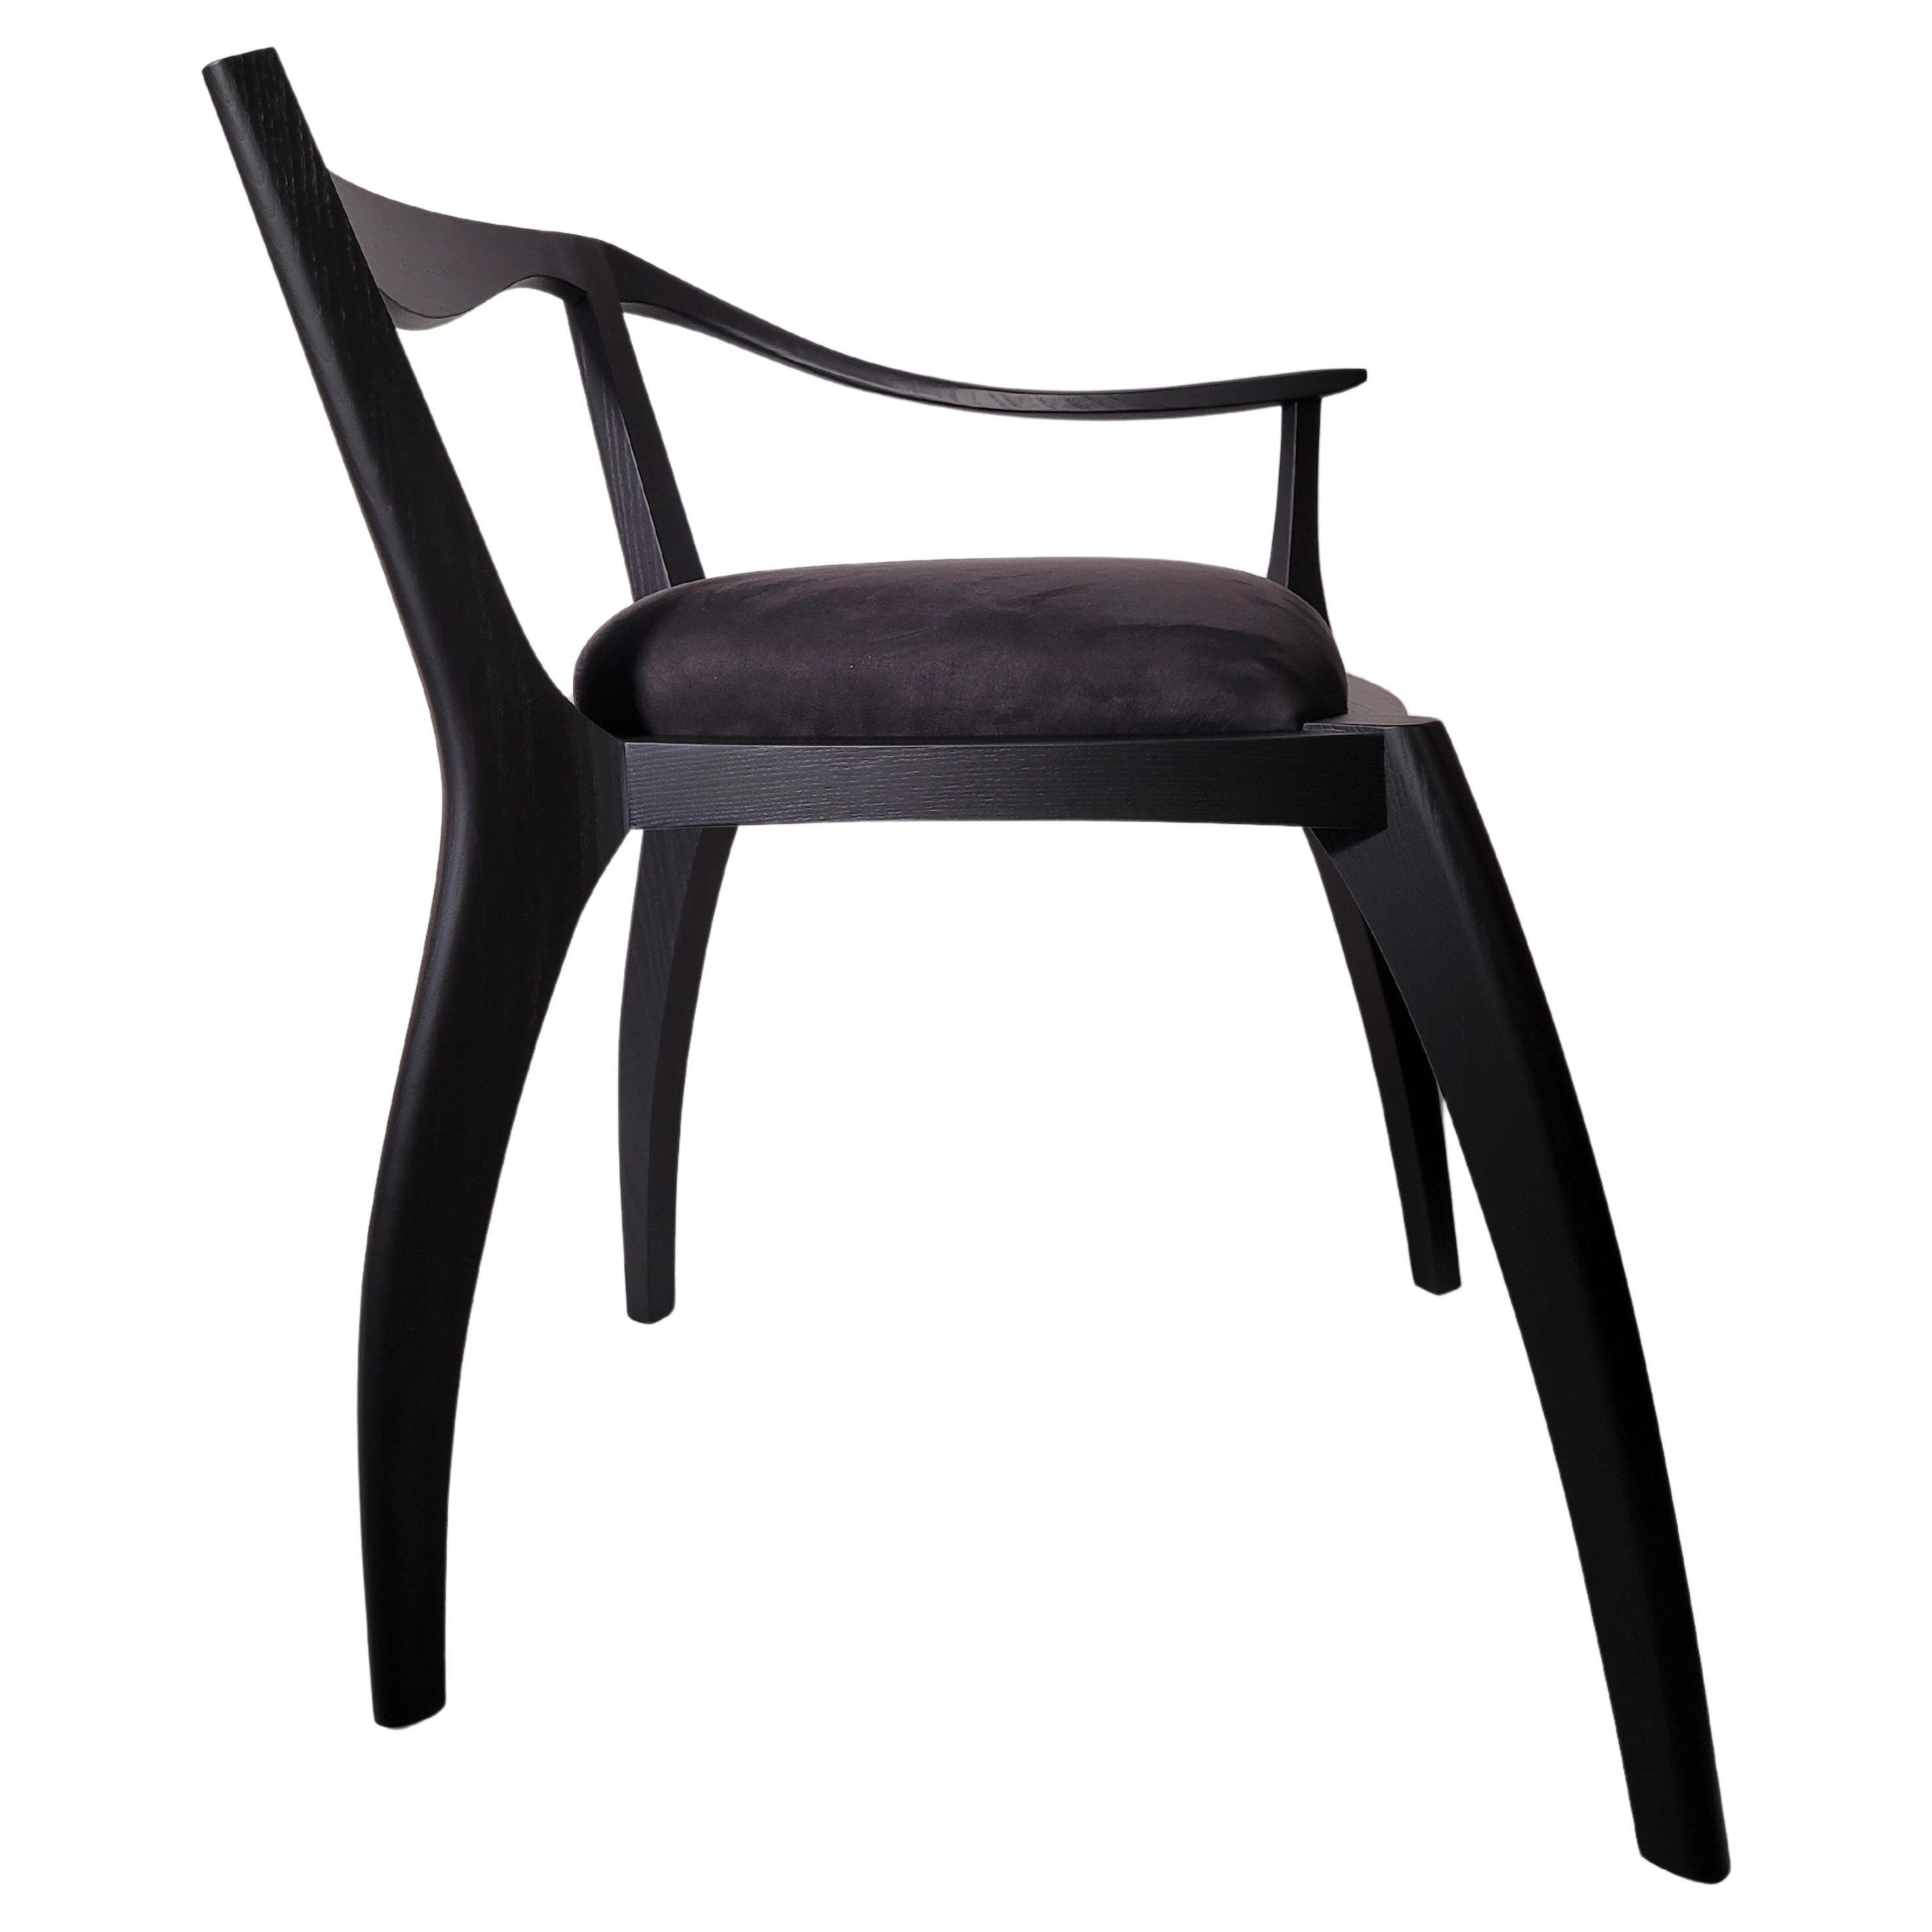 Mond 12 Reading Chair - Modern Design hand-crafted in Germany For Sale